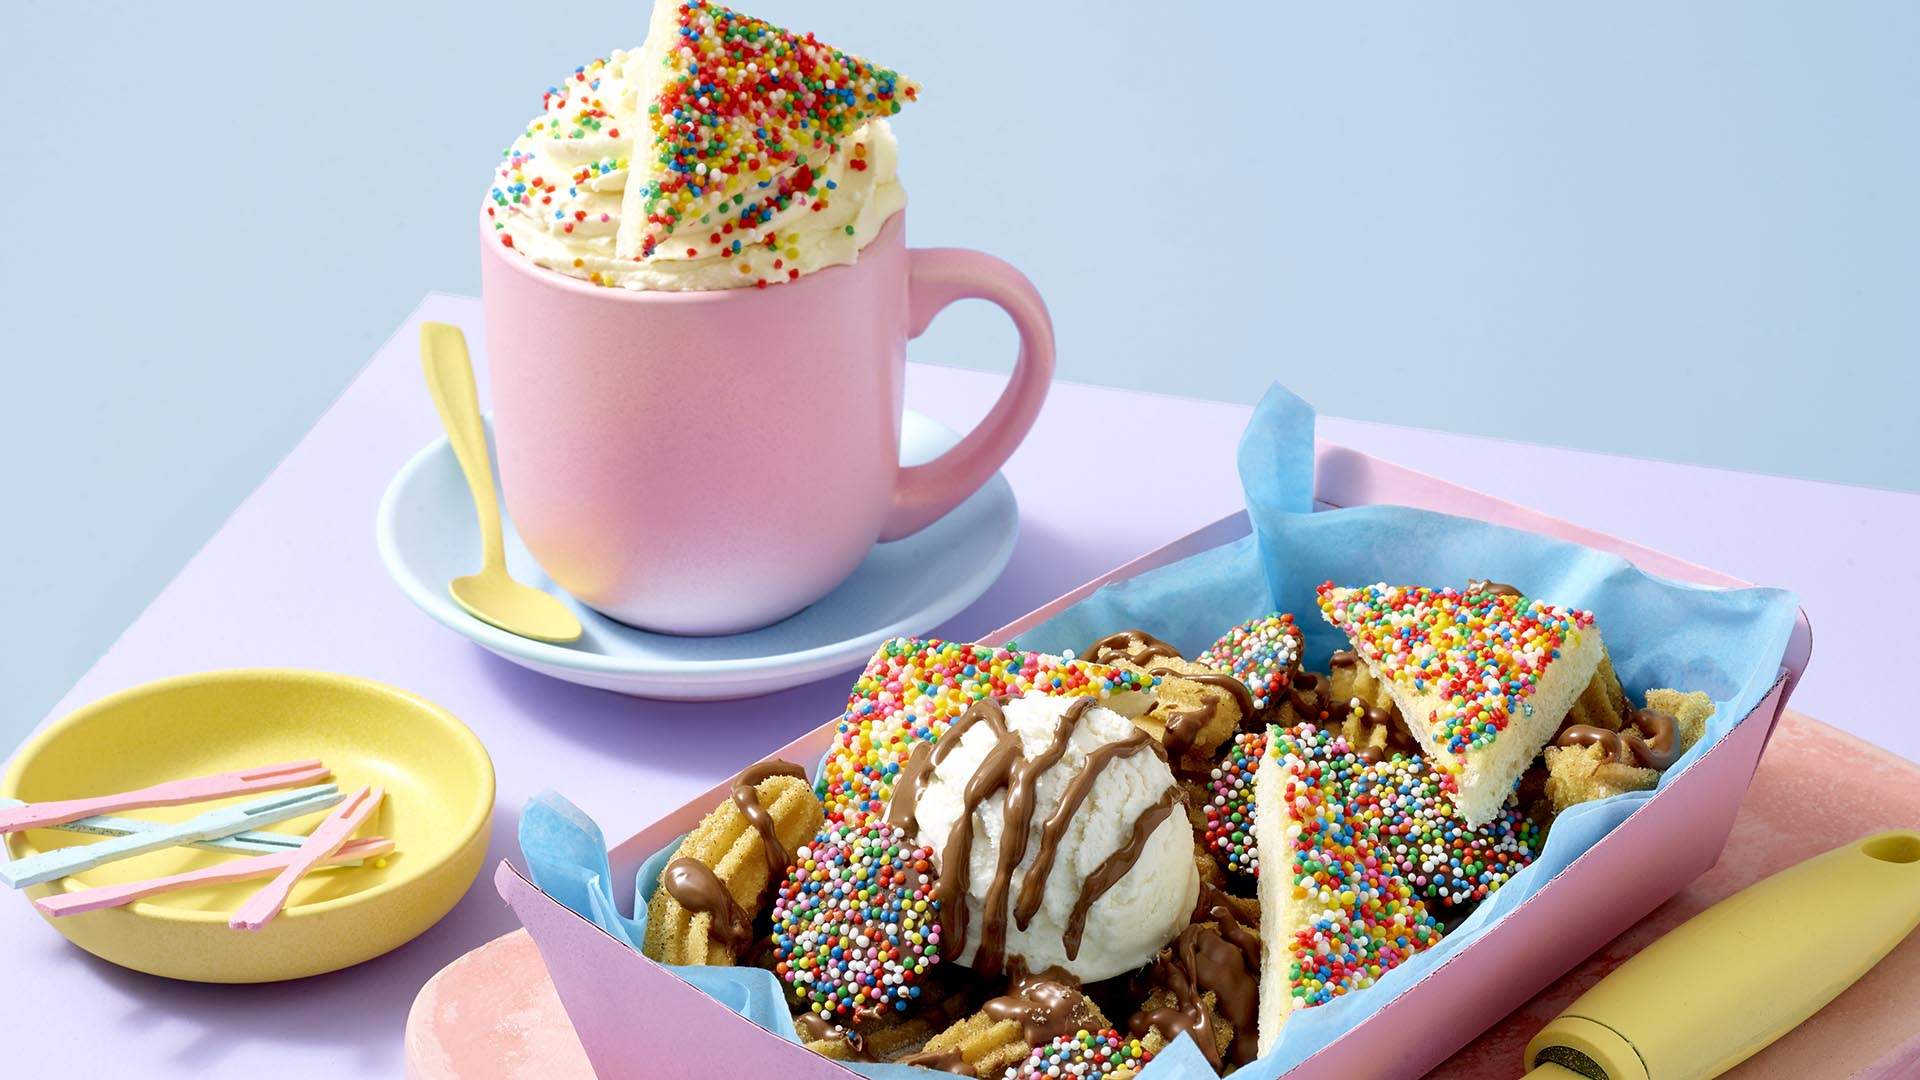 San Churro Is Serving Up Retro Dessert Snack Packs with Fairy Bread, Nerds and Chocolate Crackles